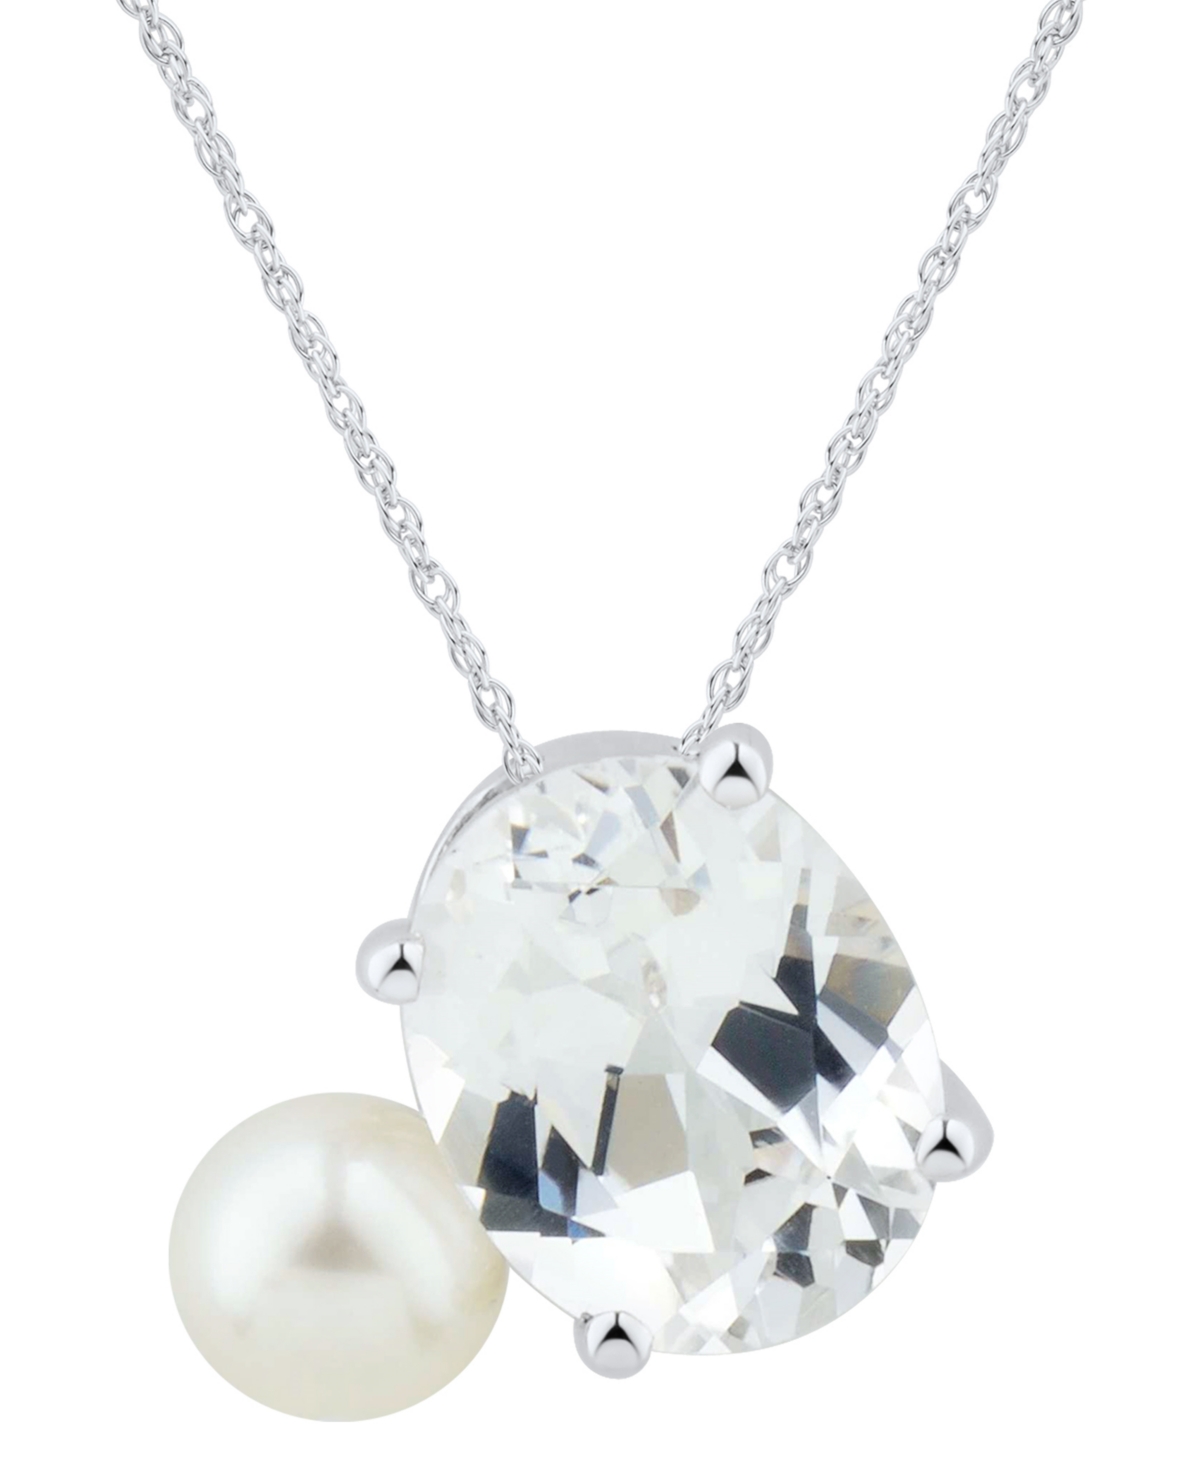 Arabella Cultured Freshwater Pearl (5mm) & Cubic Zirconia Pendant Necklace in Sterling Silver, 16" + 2" extender